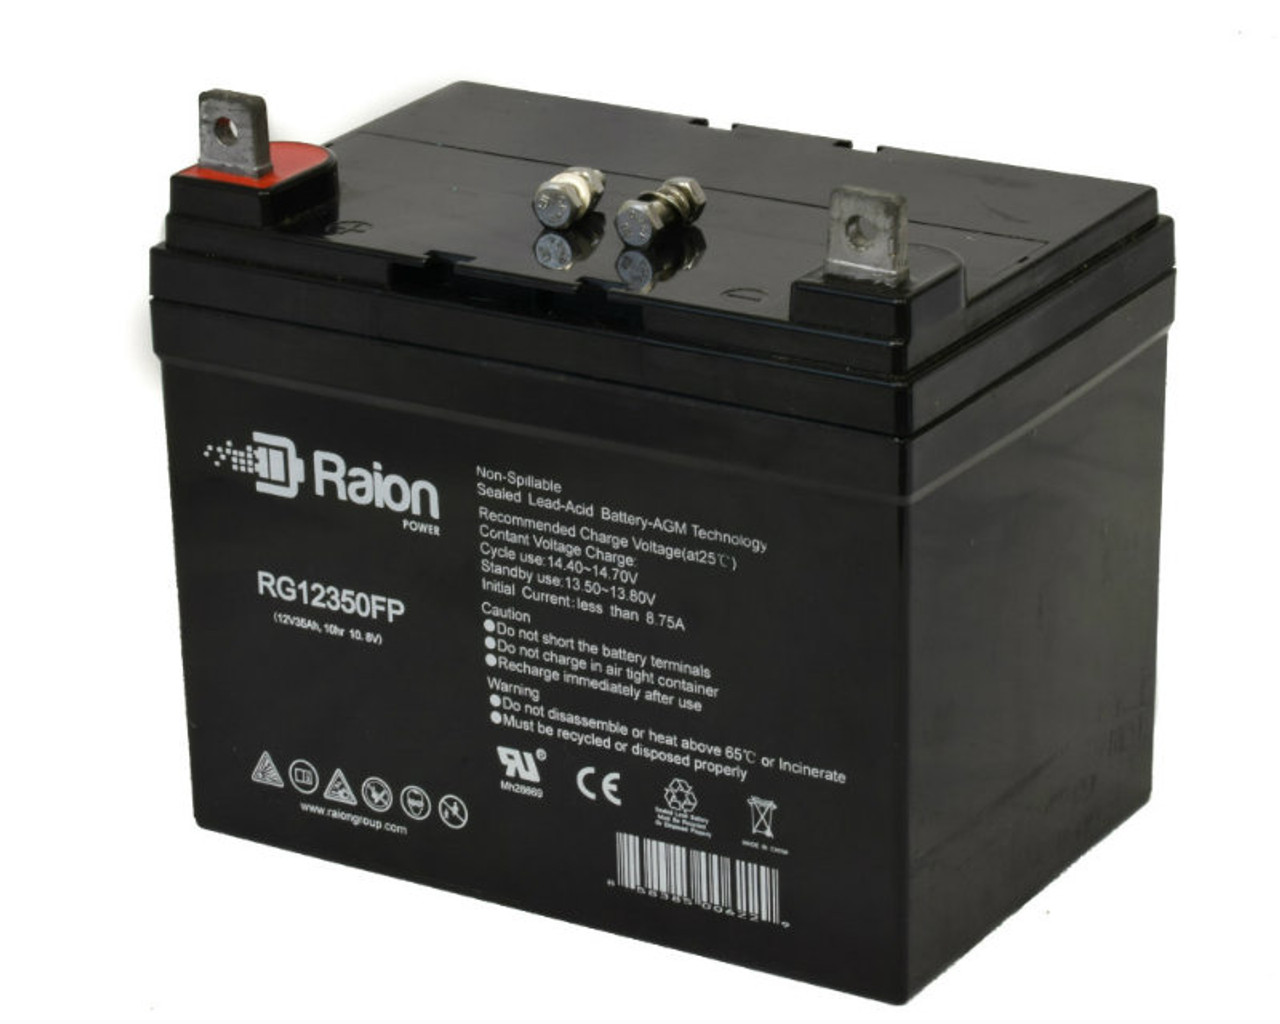 Raion Power Replacement 12V 35Ah RG12350FP Battery for Cub Cadet 382